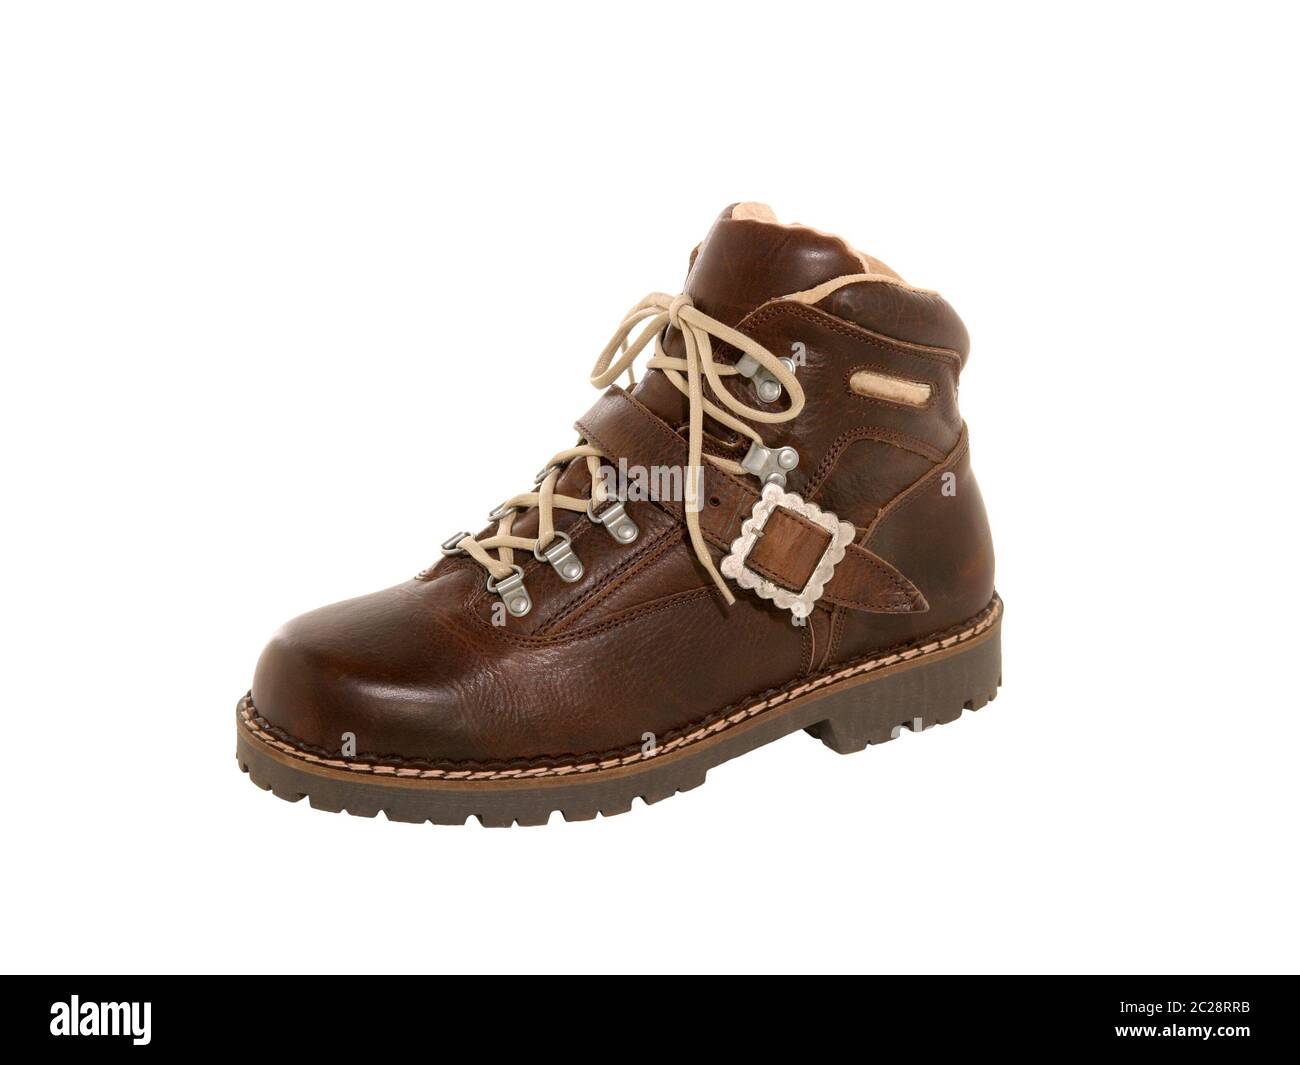 hiking boot brown leather traditional style isolated on white Stock Photo